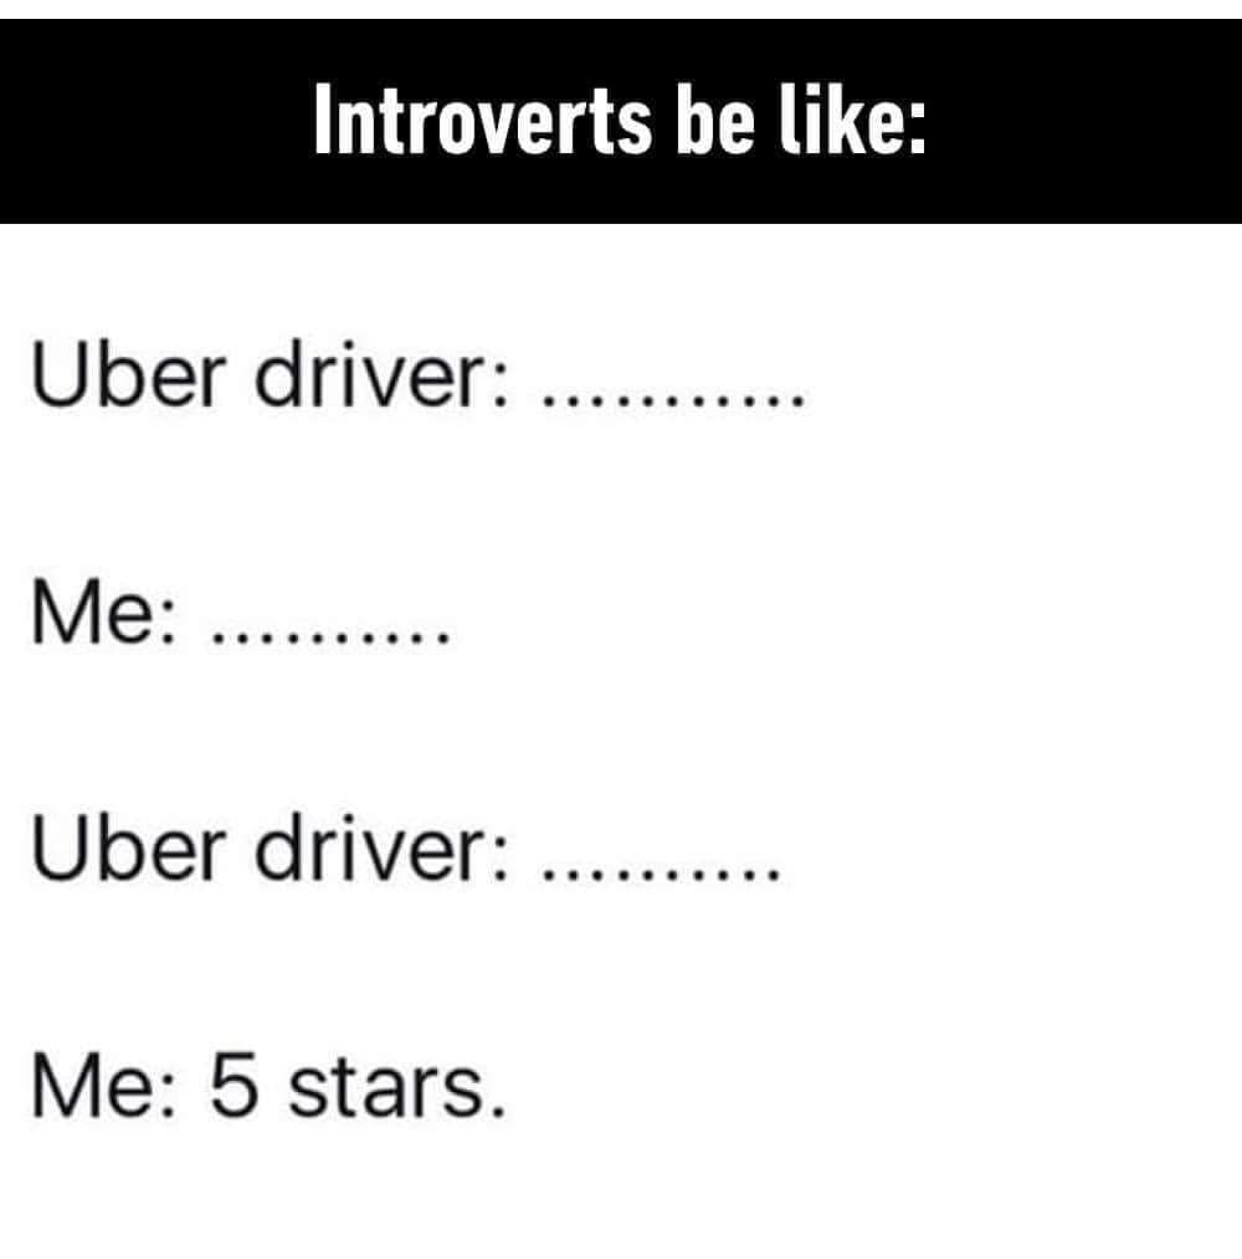 document - Introverts be Uber driver. Me .......... Uber driver.. Me 5 stars.